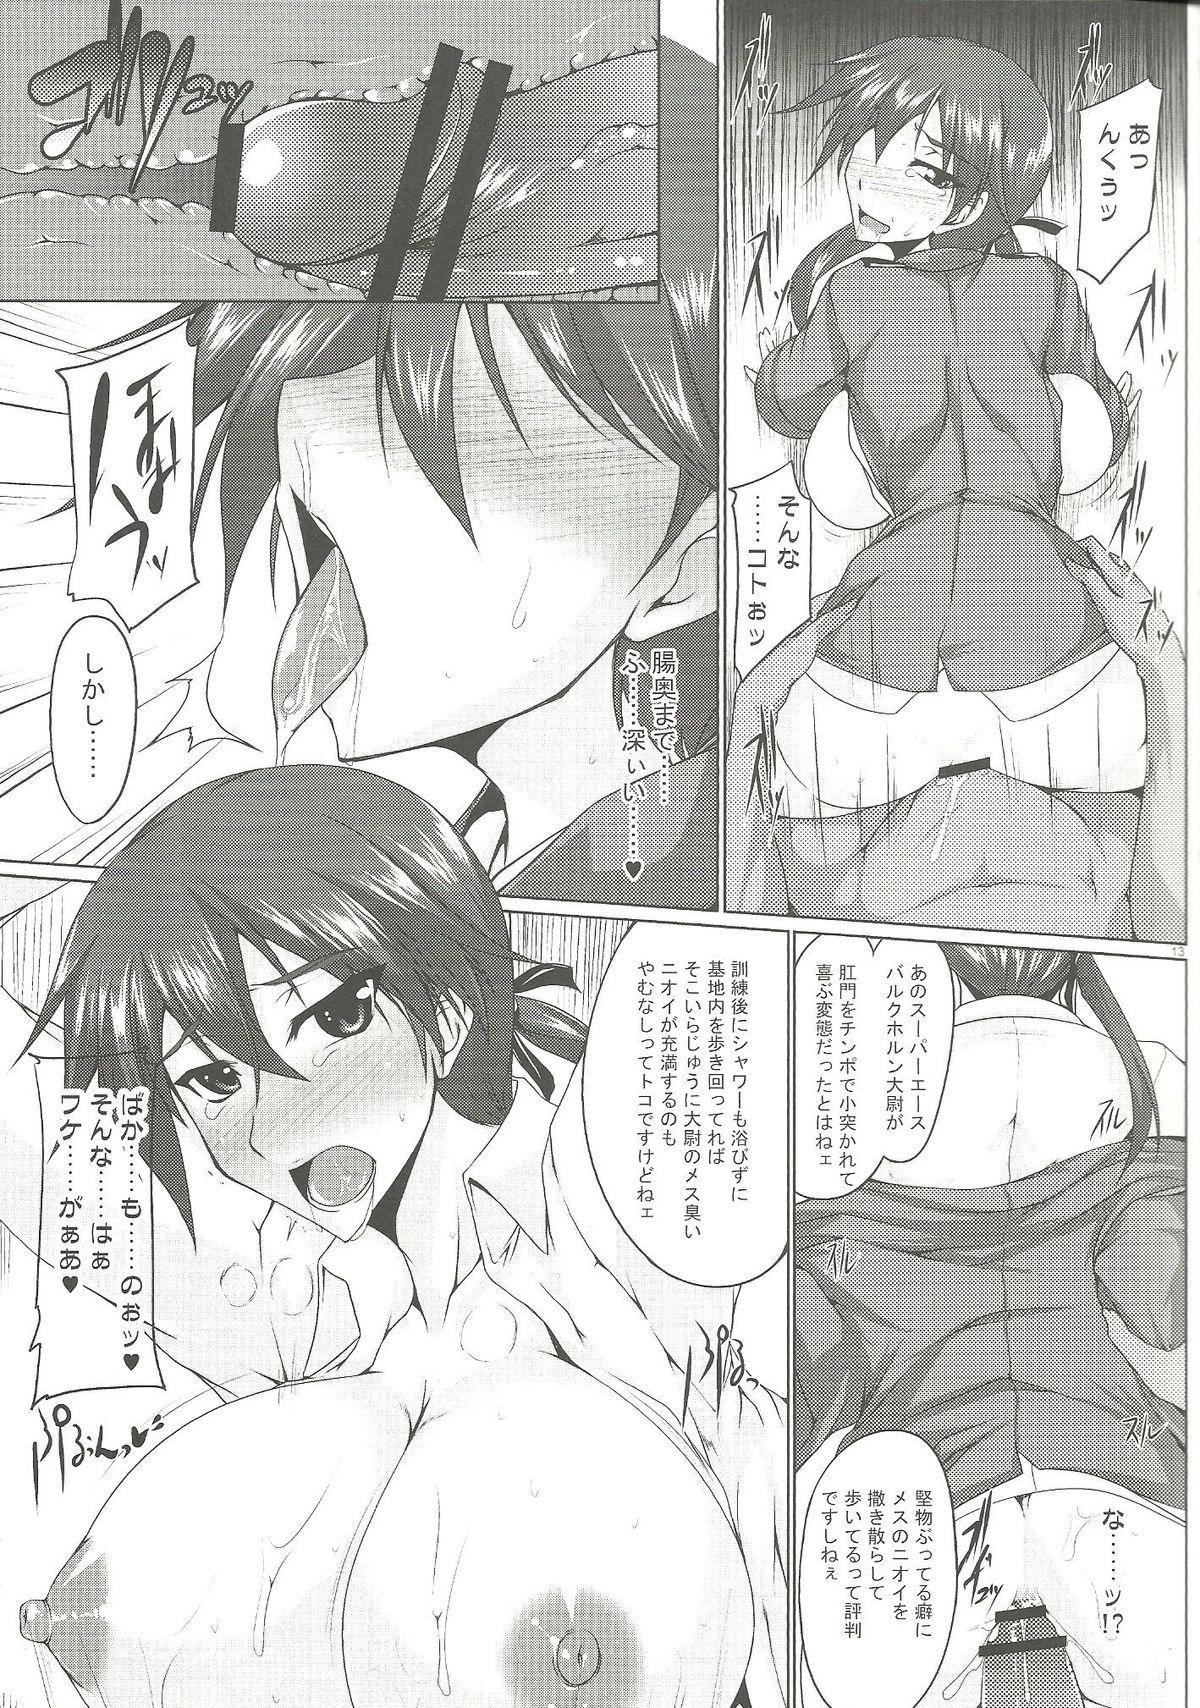 Beach Booby Trap - Strike witches Petite Porn - Page 12